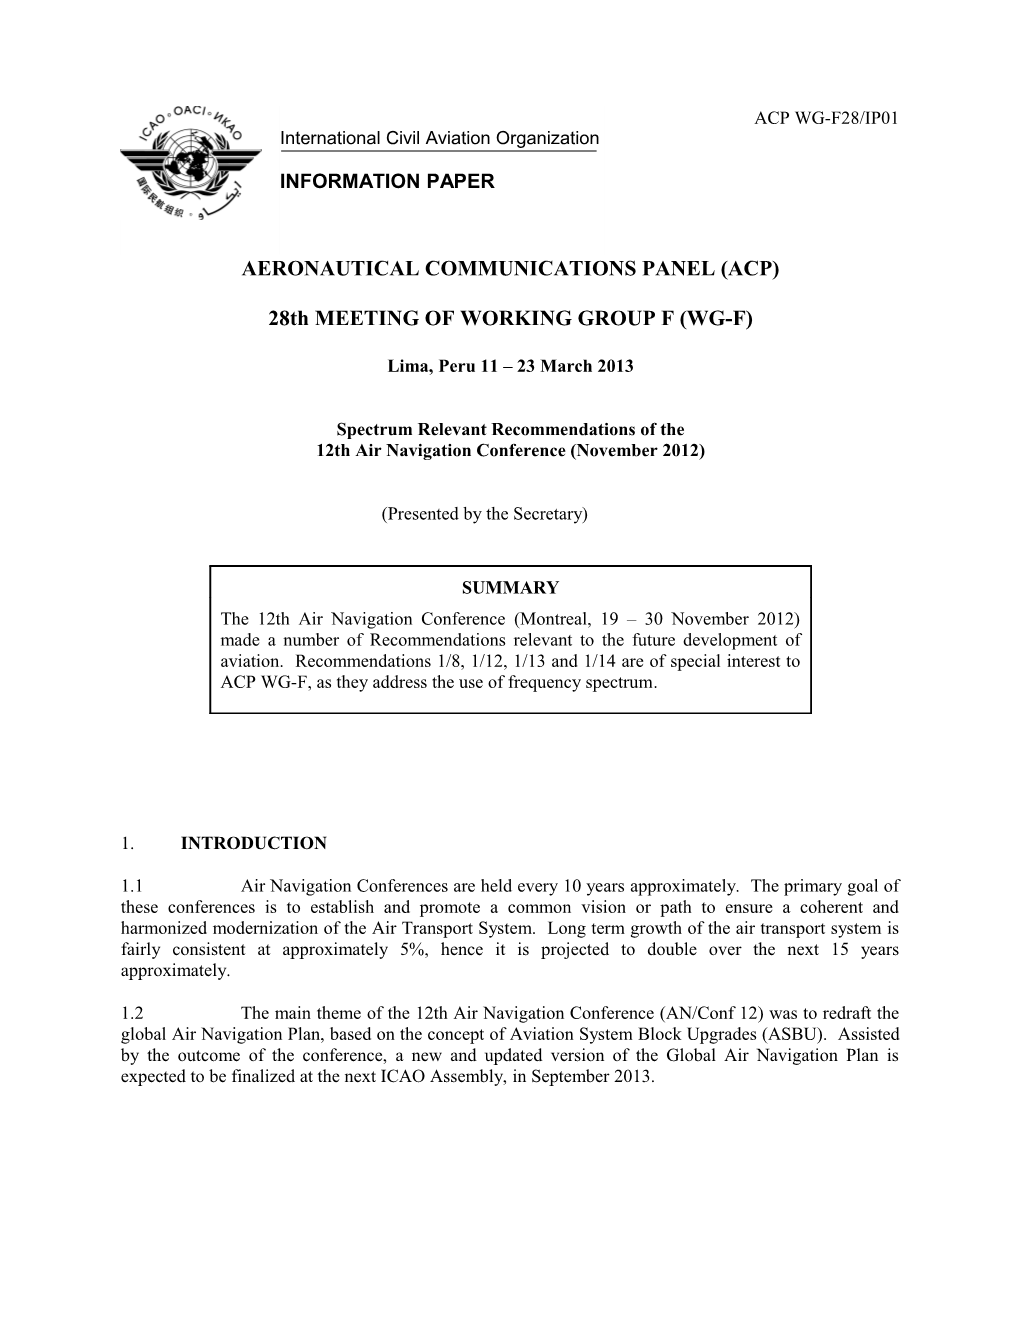 Proposal from ITU-R WP5A for the Public Mobile Communications with Aircraft (Revision 1